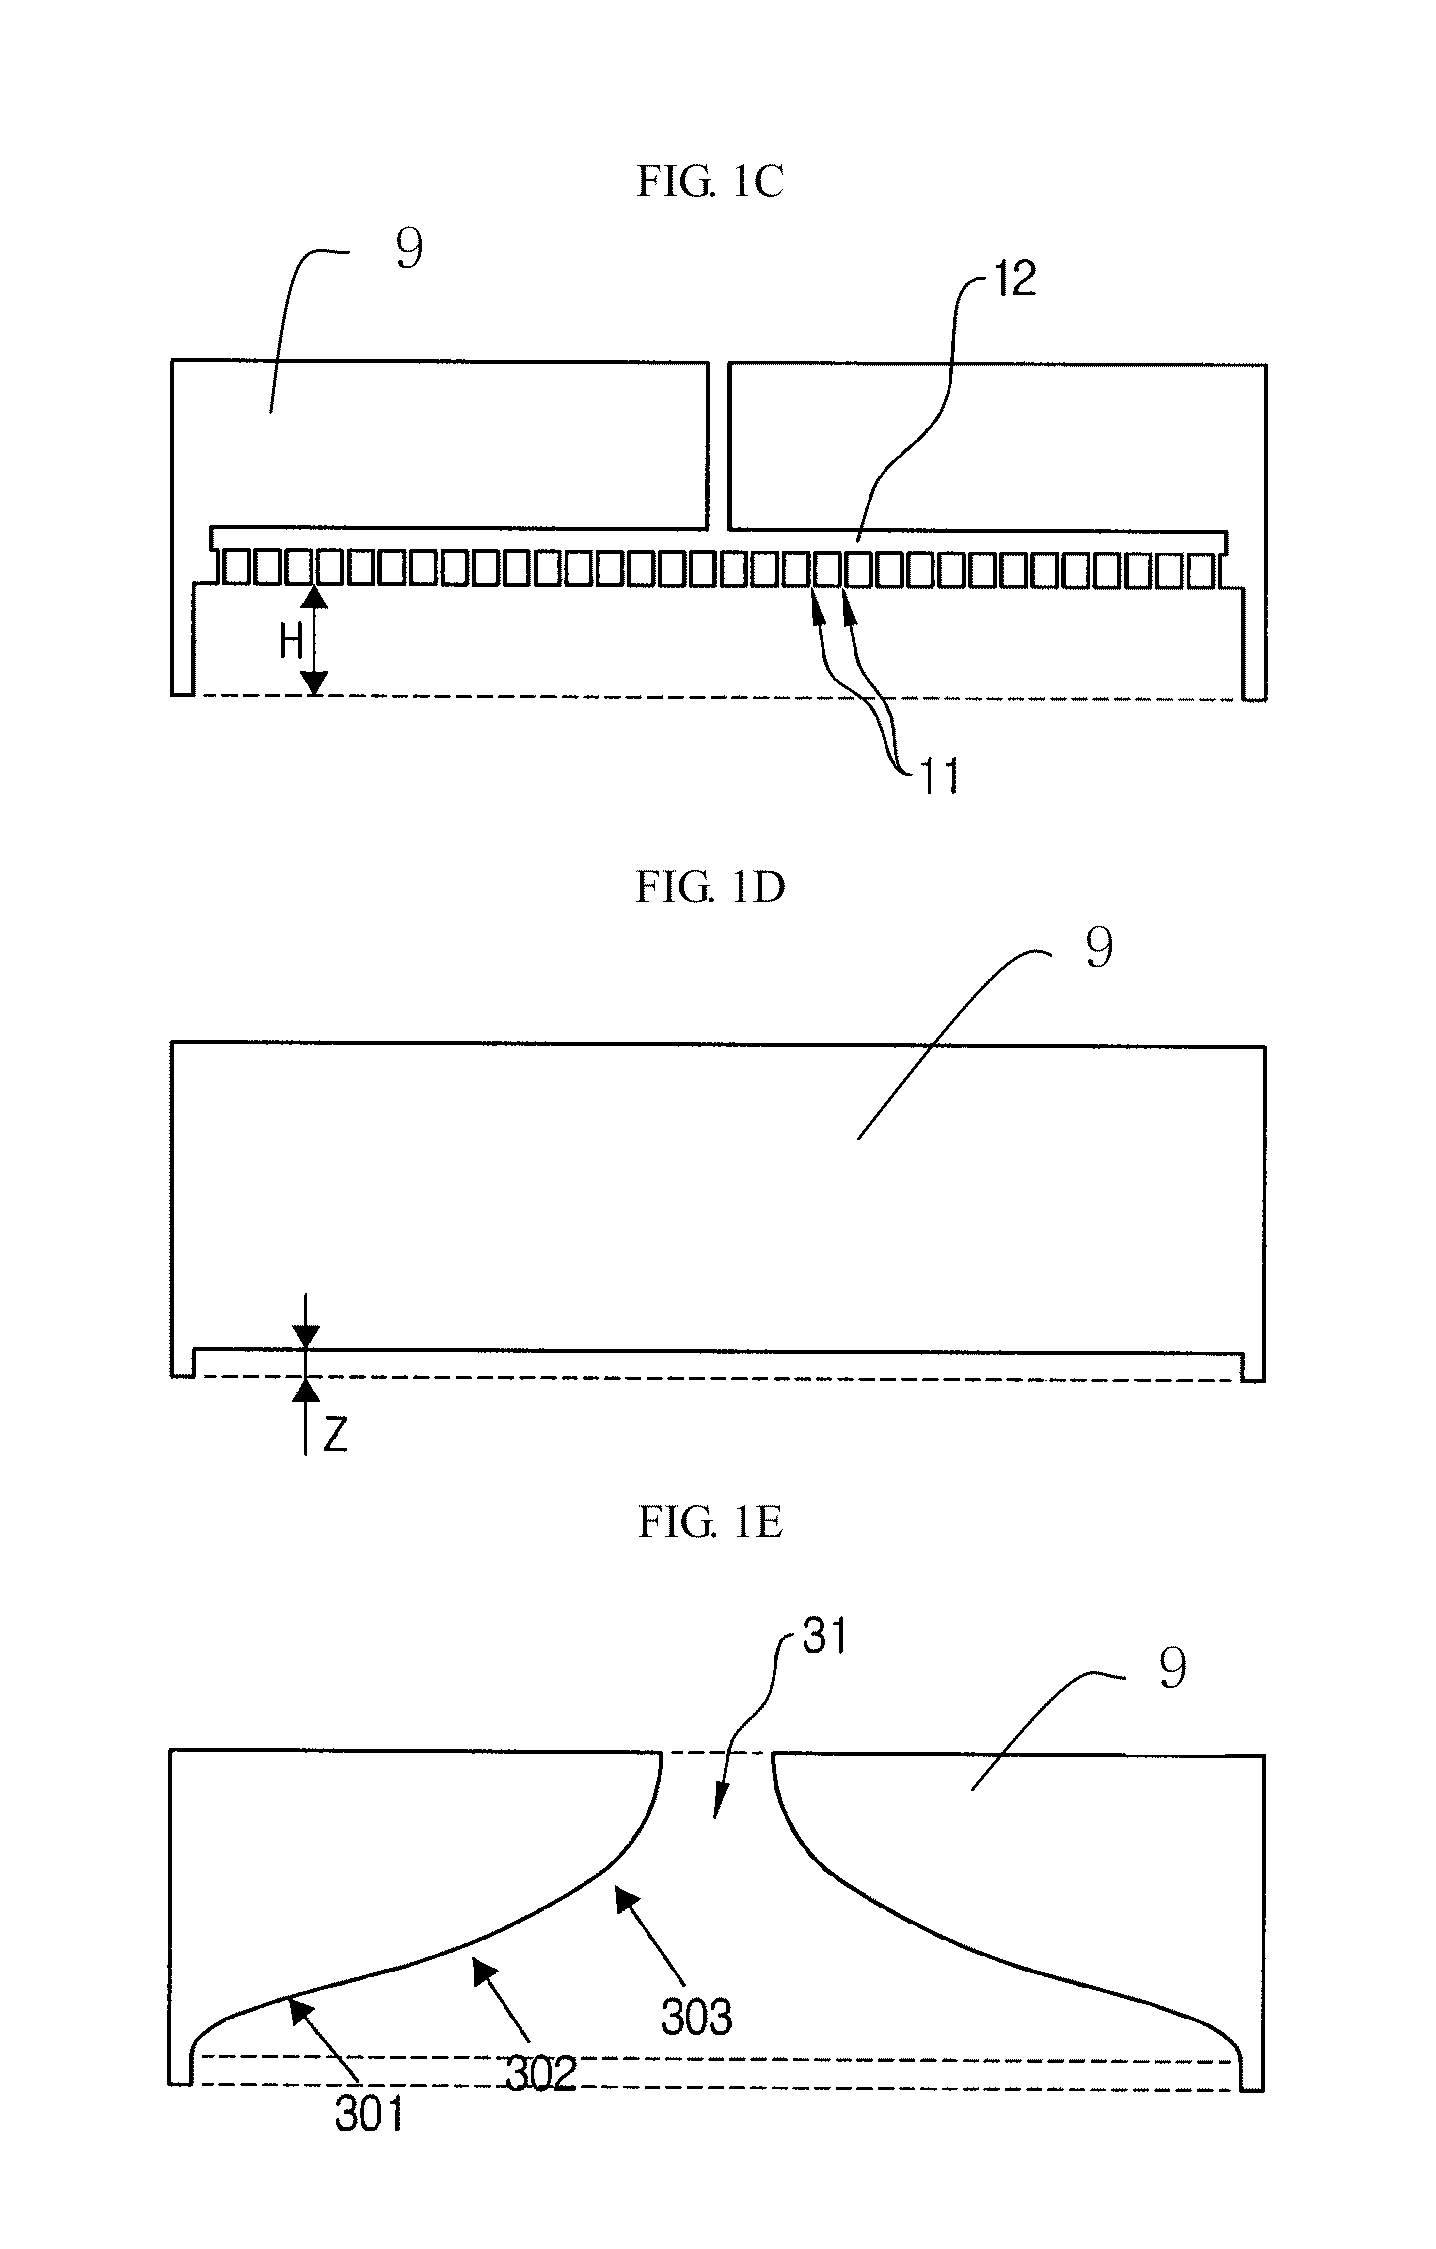 Vapor deposition reactor and method for forming thin film